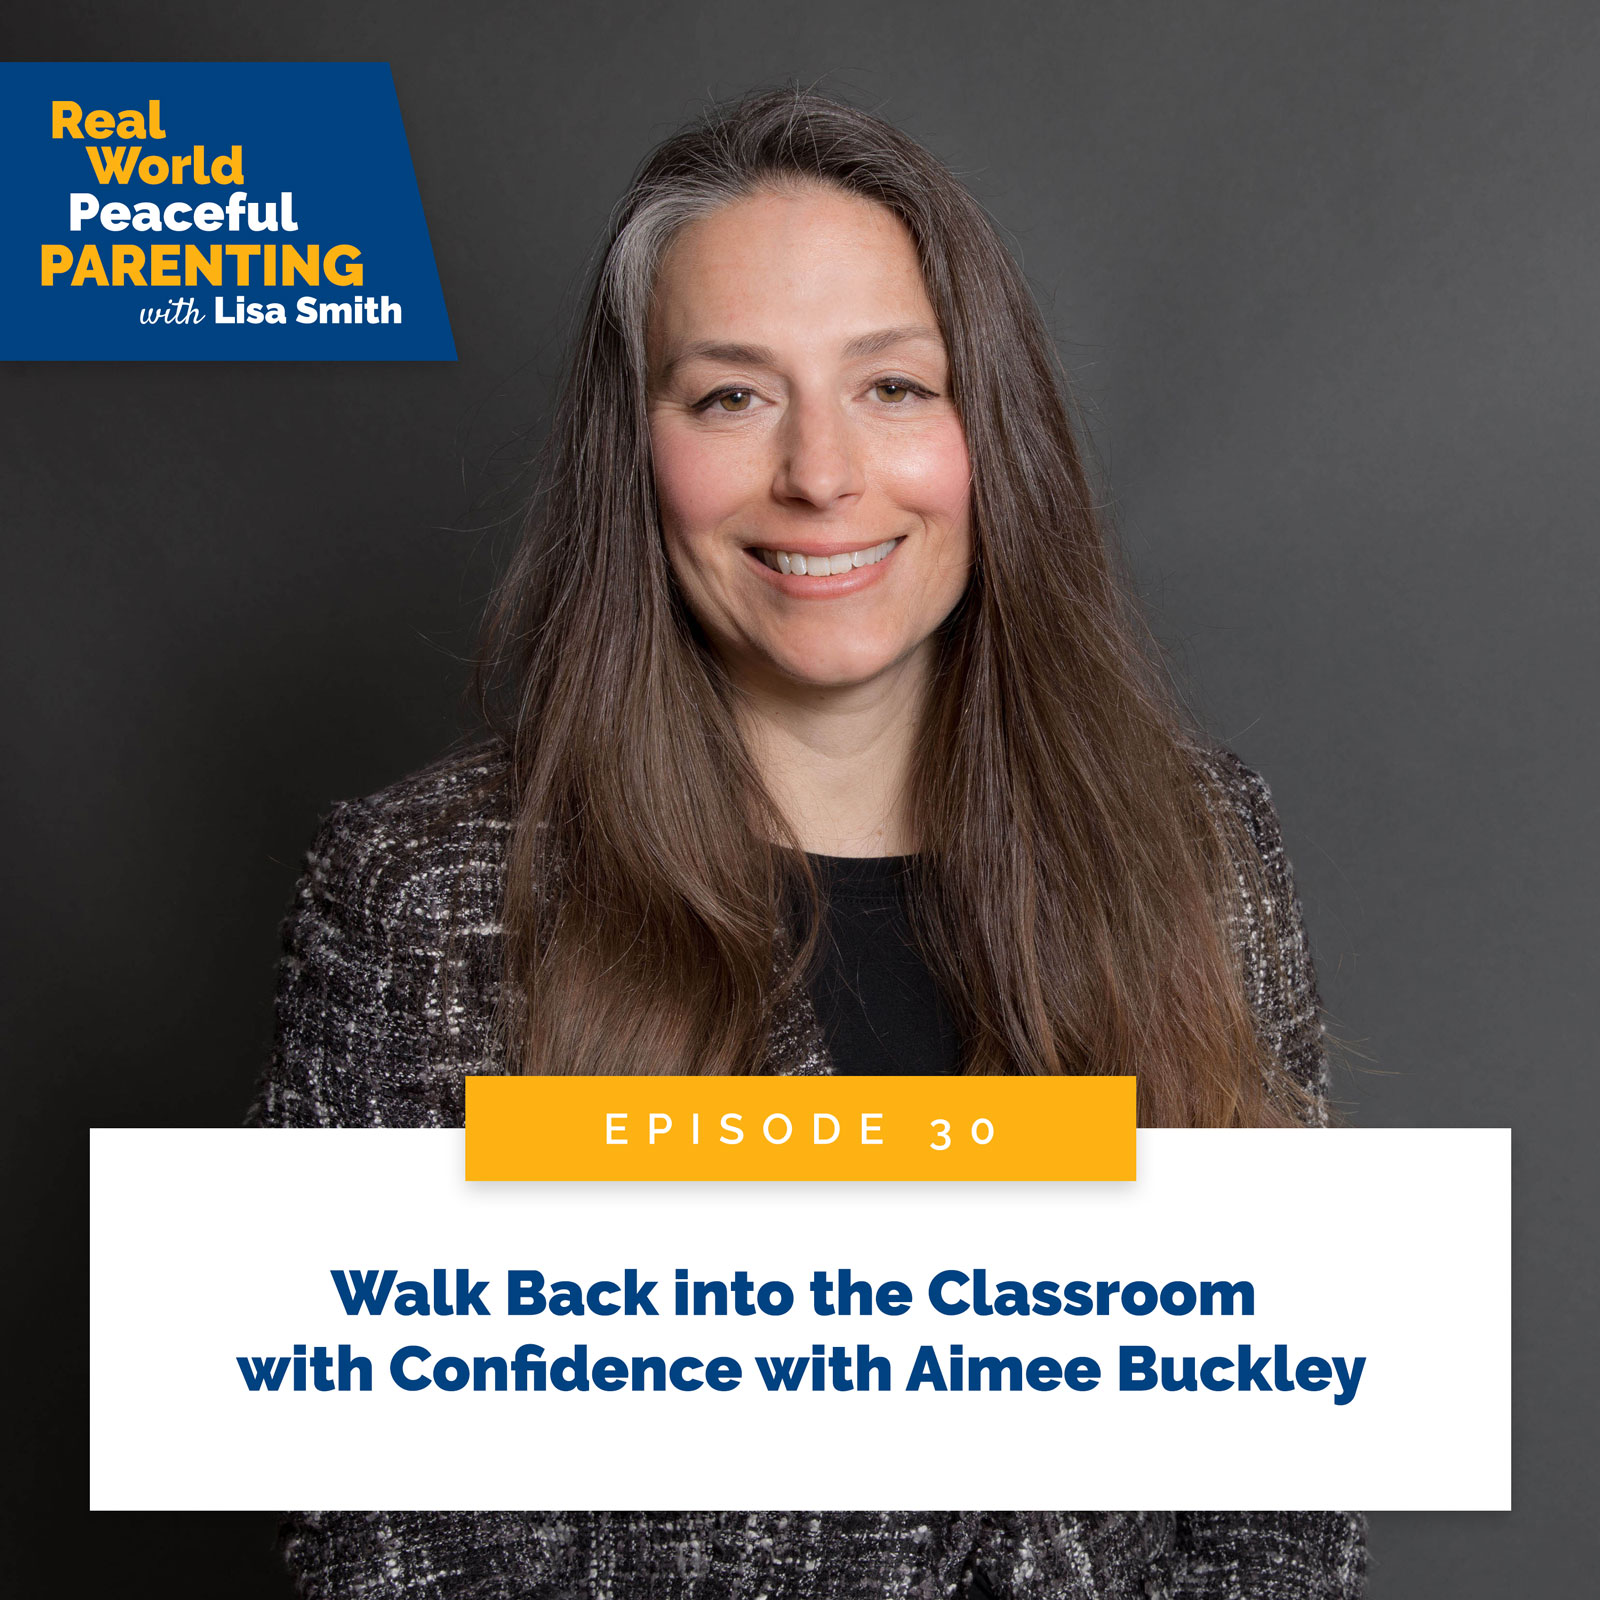 Real World Peaceful Parenting with Lisa Smith | Walk Back into the Classroom with Confidence with Aimee Buckley